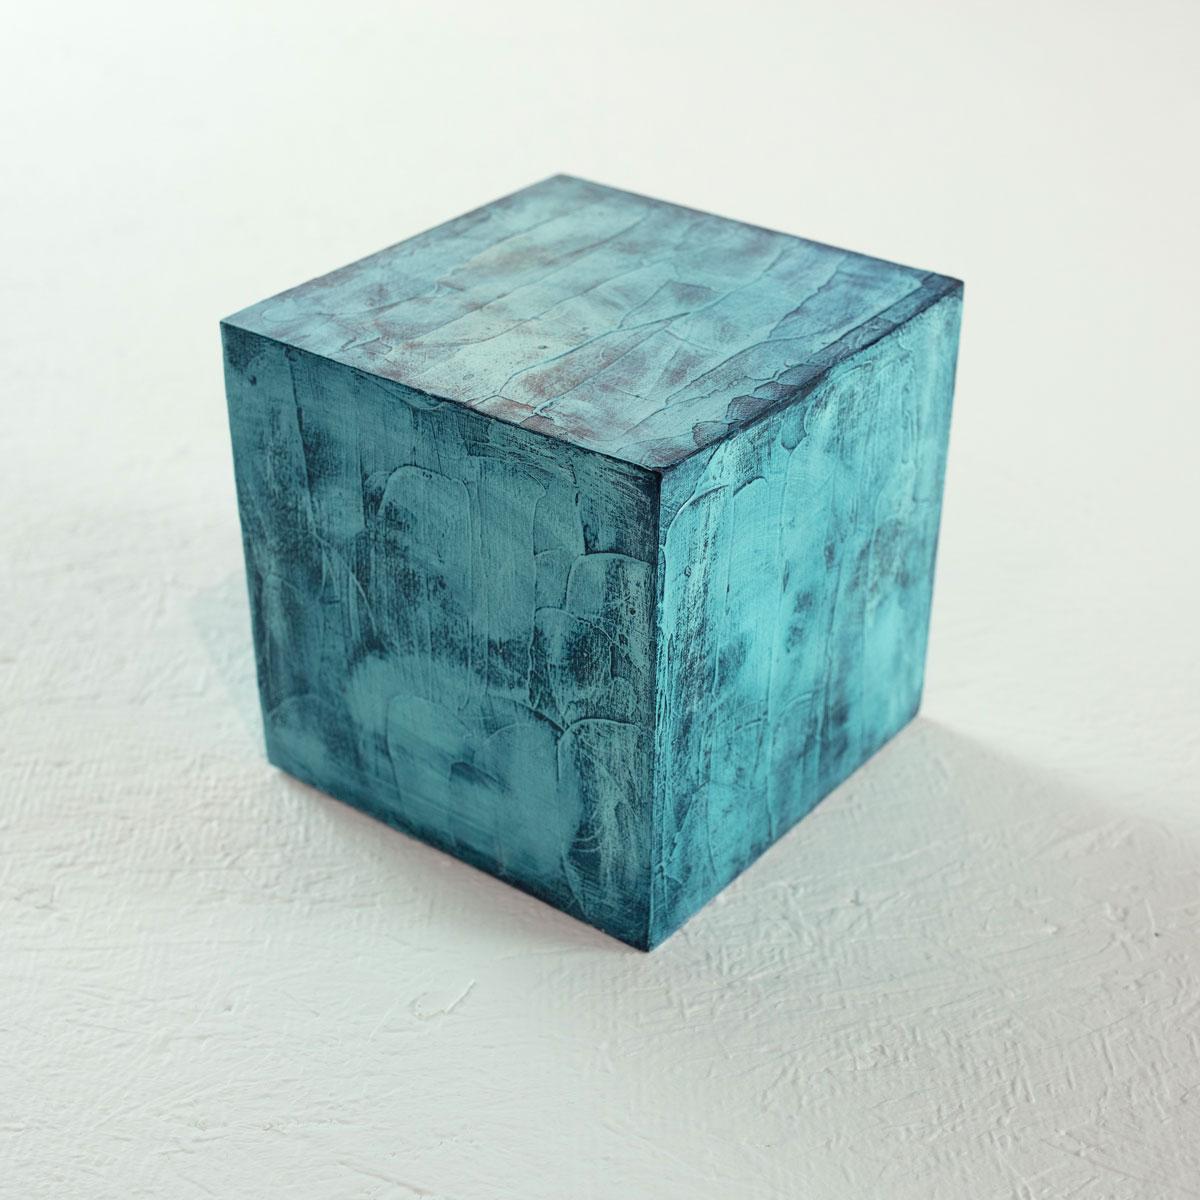 Sofie Swann Abstract Painting - "Little Swann 8" Painted Wooden Cube Sculpture